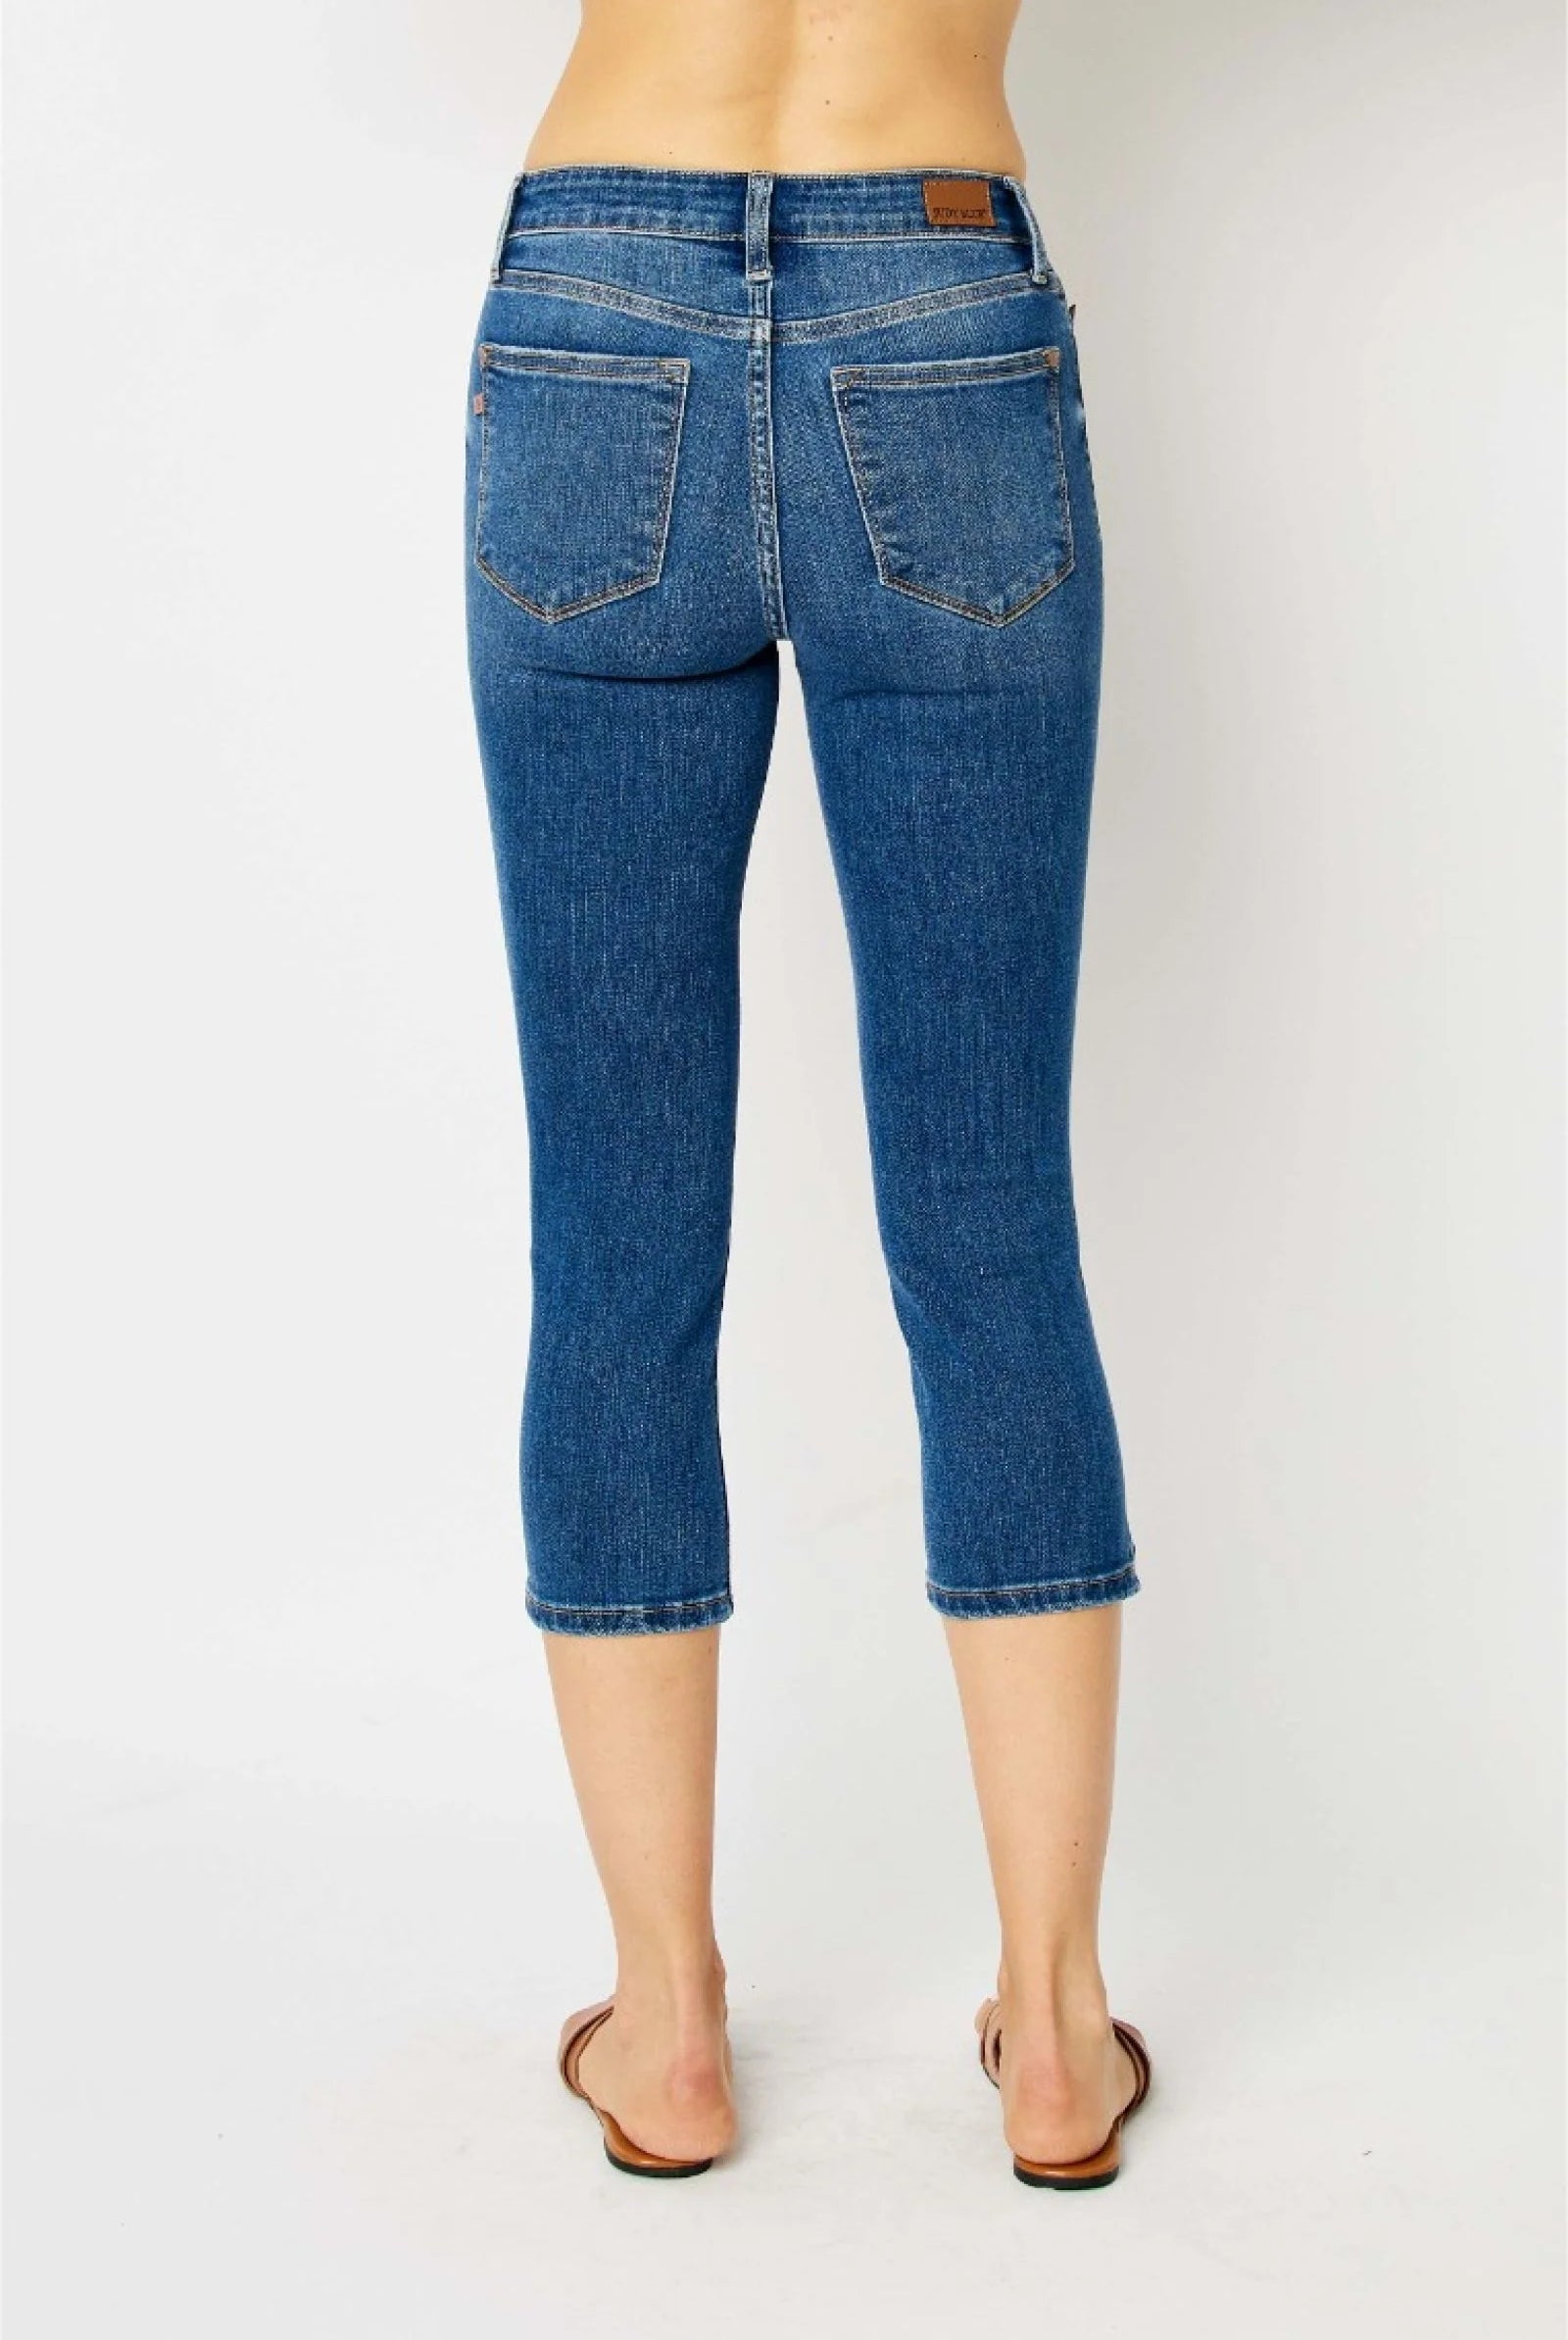 Judy Blue Mid-rise Capri Jeans with Side Slits-Jeans-Judy Blue-Stuffology - Where Vintage Meets Modern, A Boutique for Real Women in Crosbyton, TX